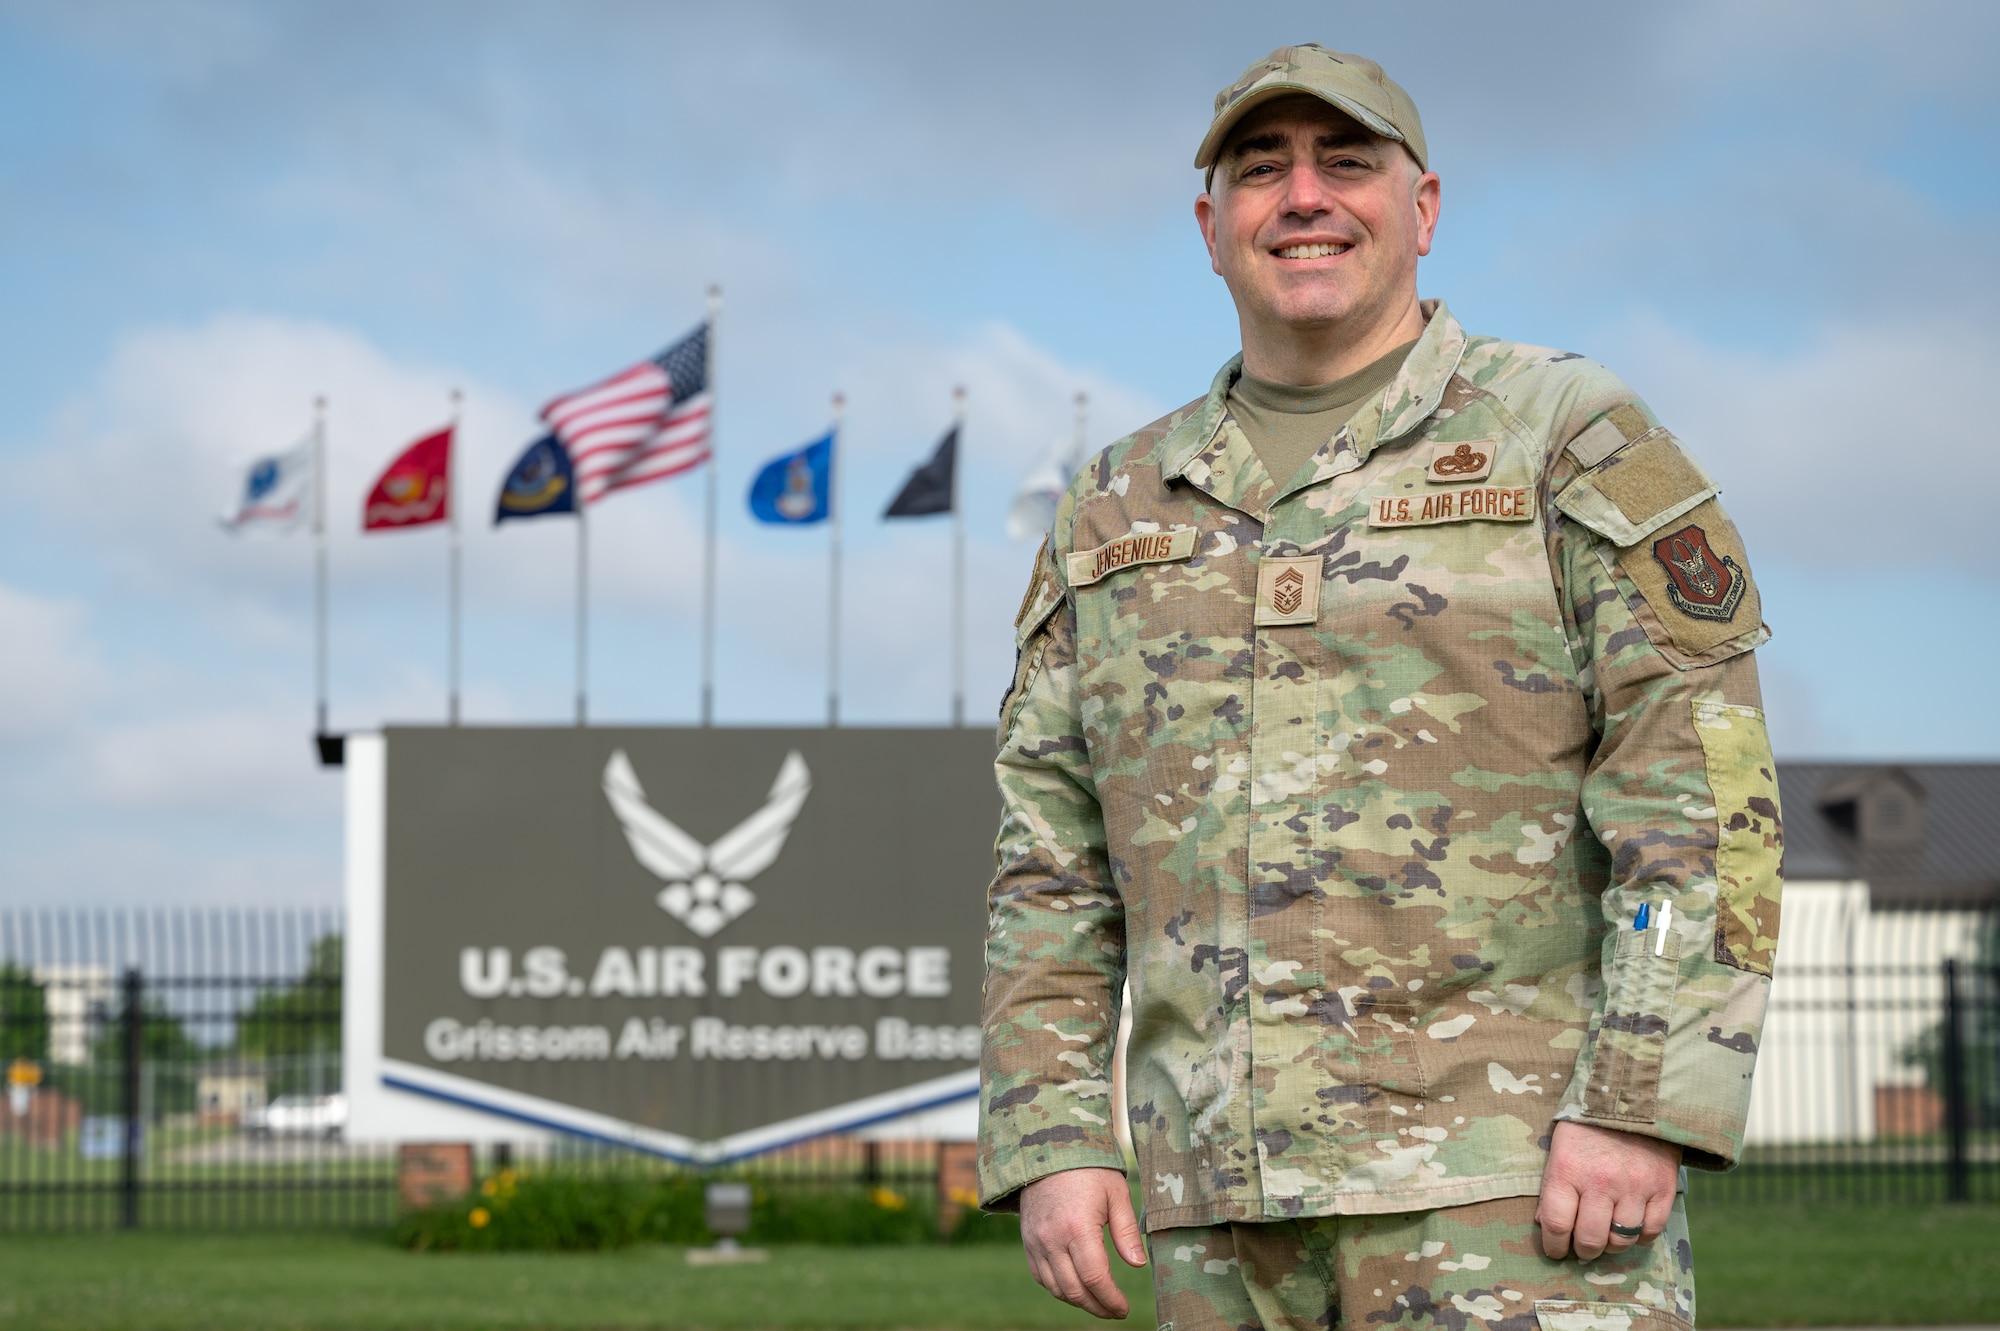 A man in a U.S. Air Force duty uniform stands in front of a sign in the distance that reads "U.S. AIR FORCE" "Grissom Air Reserve Base".